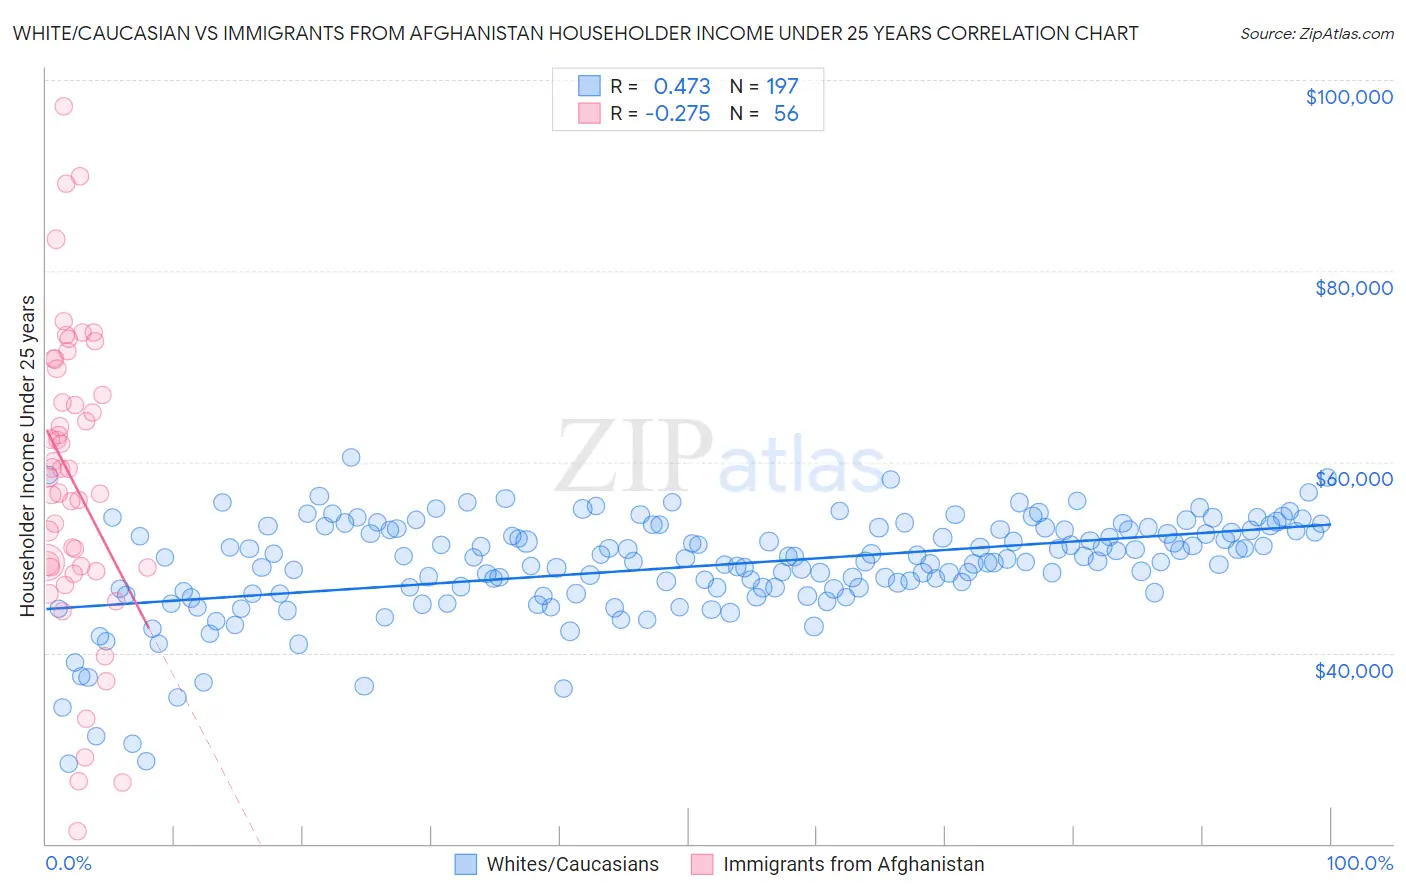 White/Caucasian vs Immigrants from Afghanistan Householder Income Under 25 years